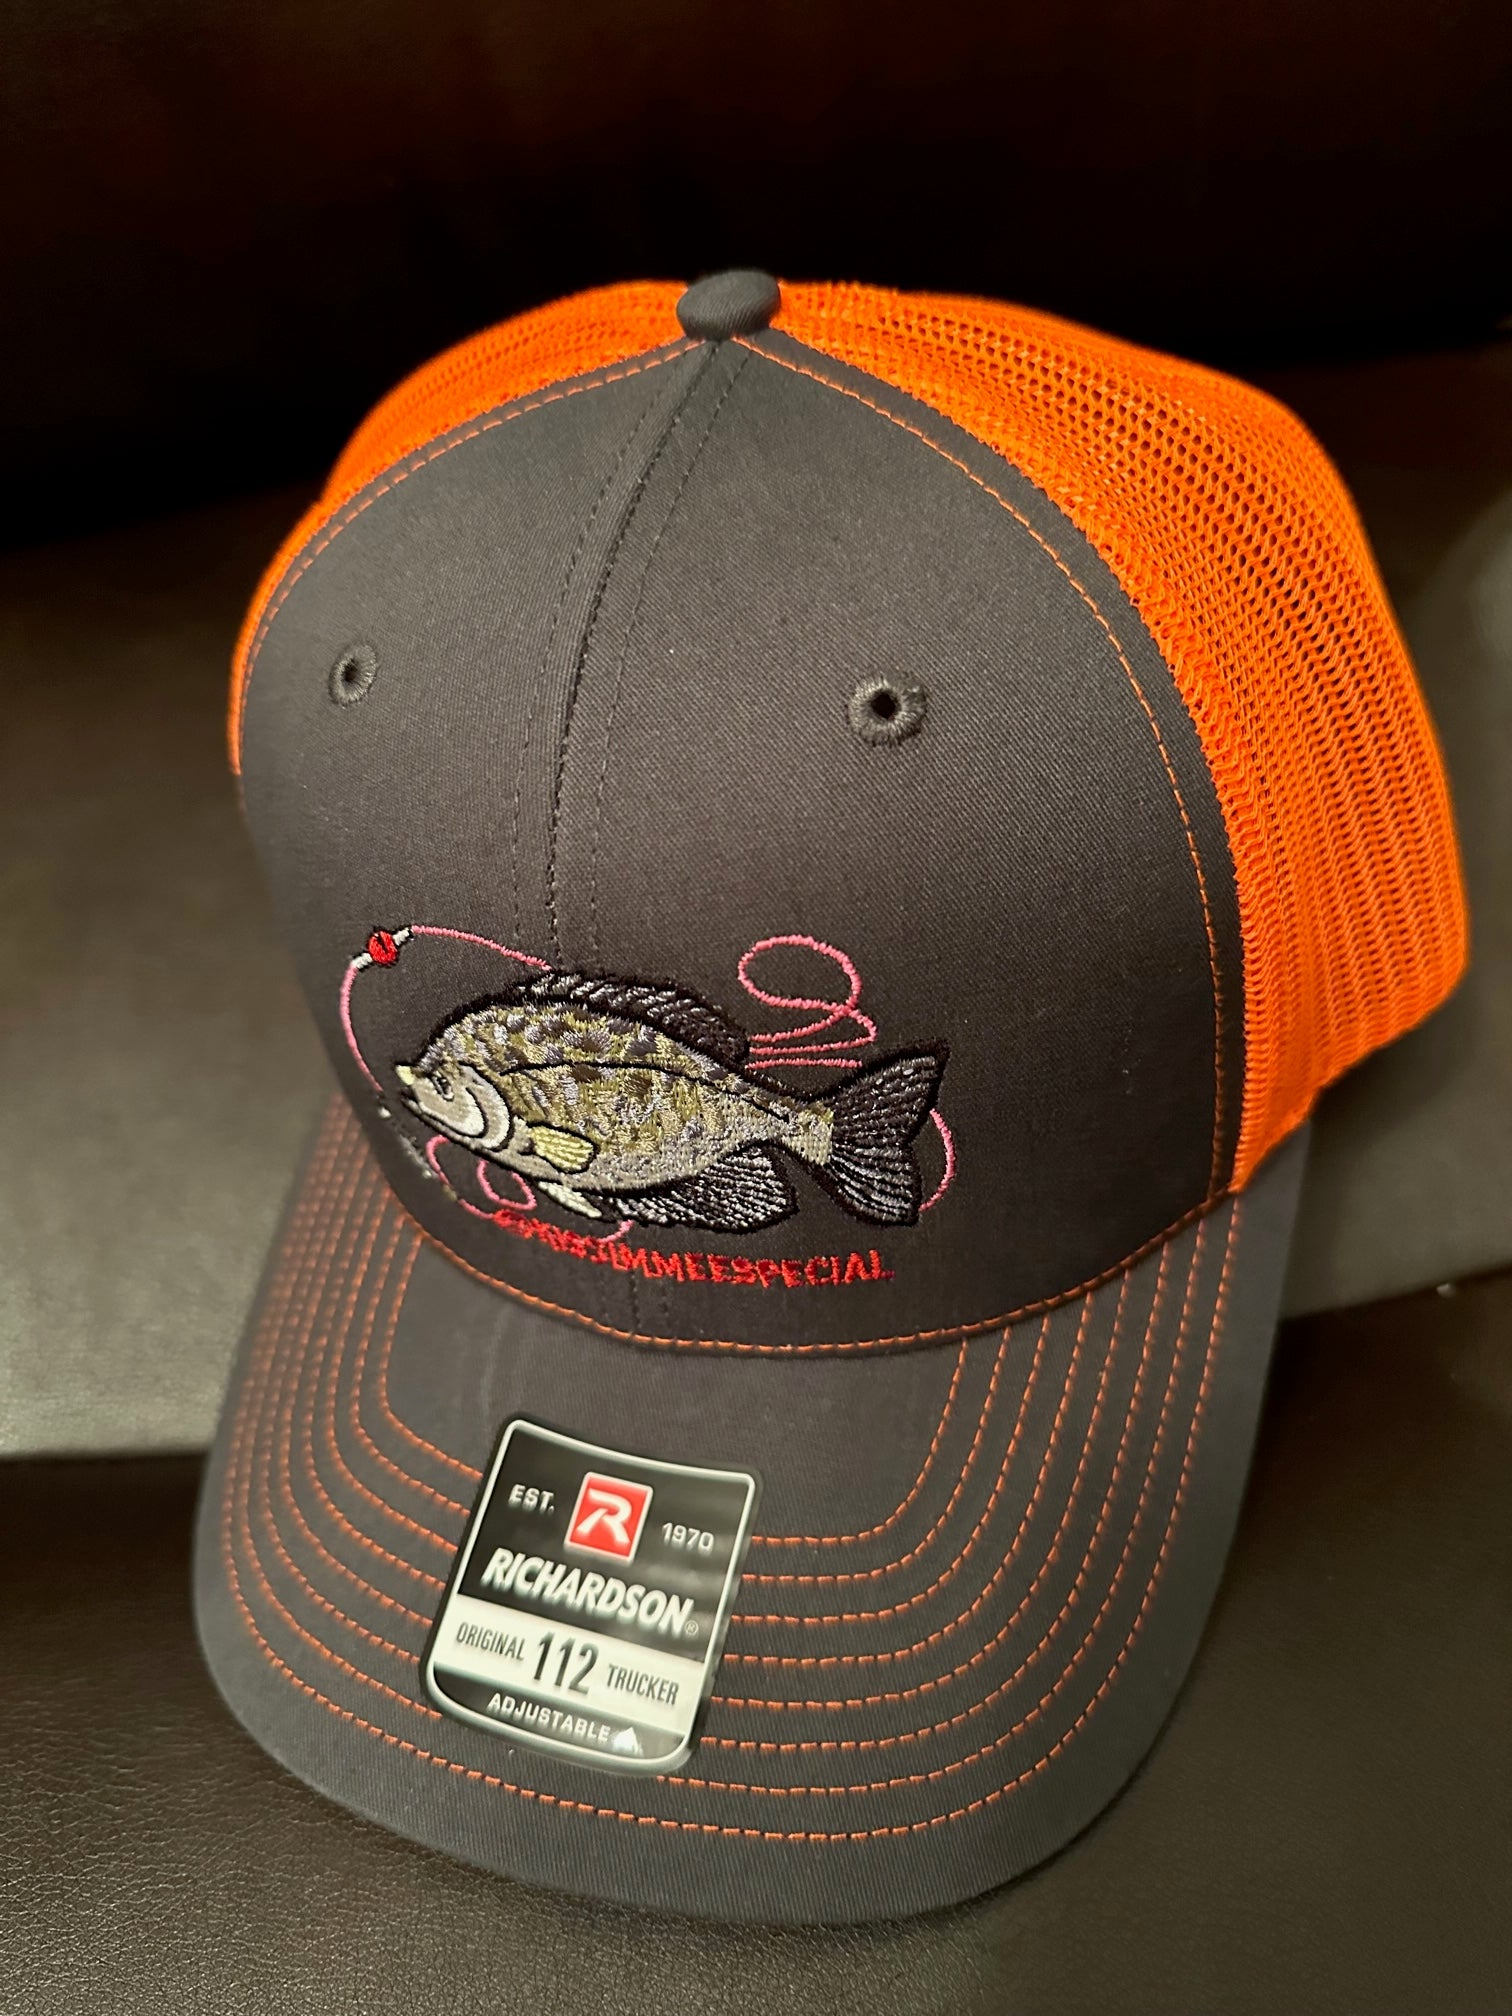 KISSIMMEESPECIAL CRAPPIE HAT – Kissimmeespecial